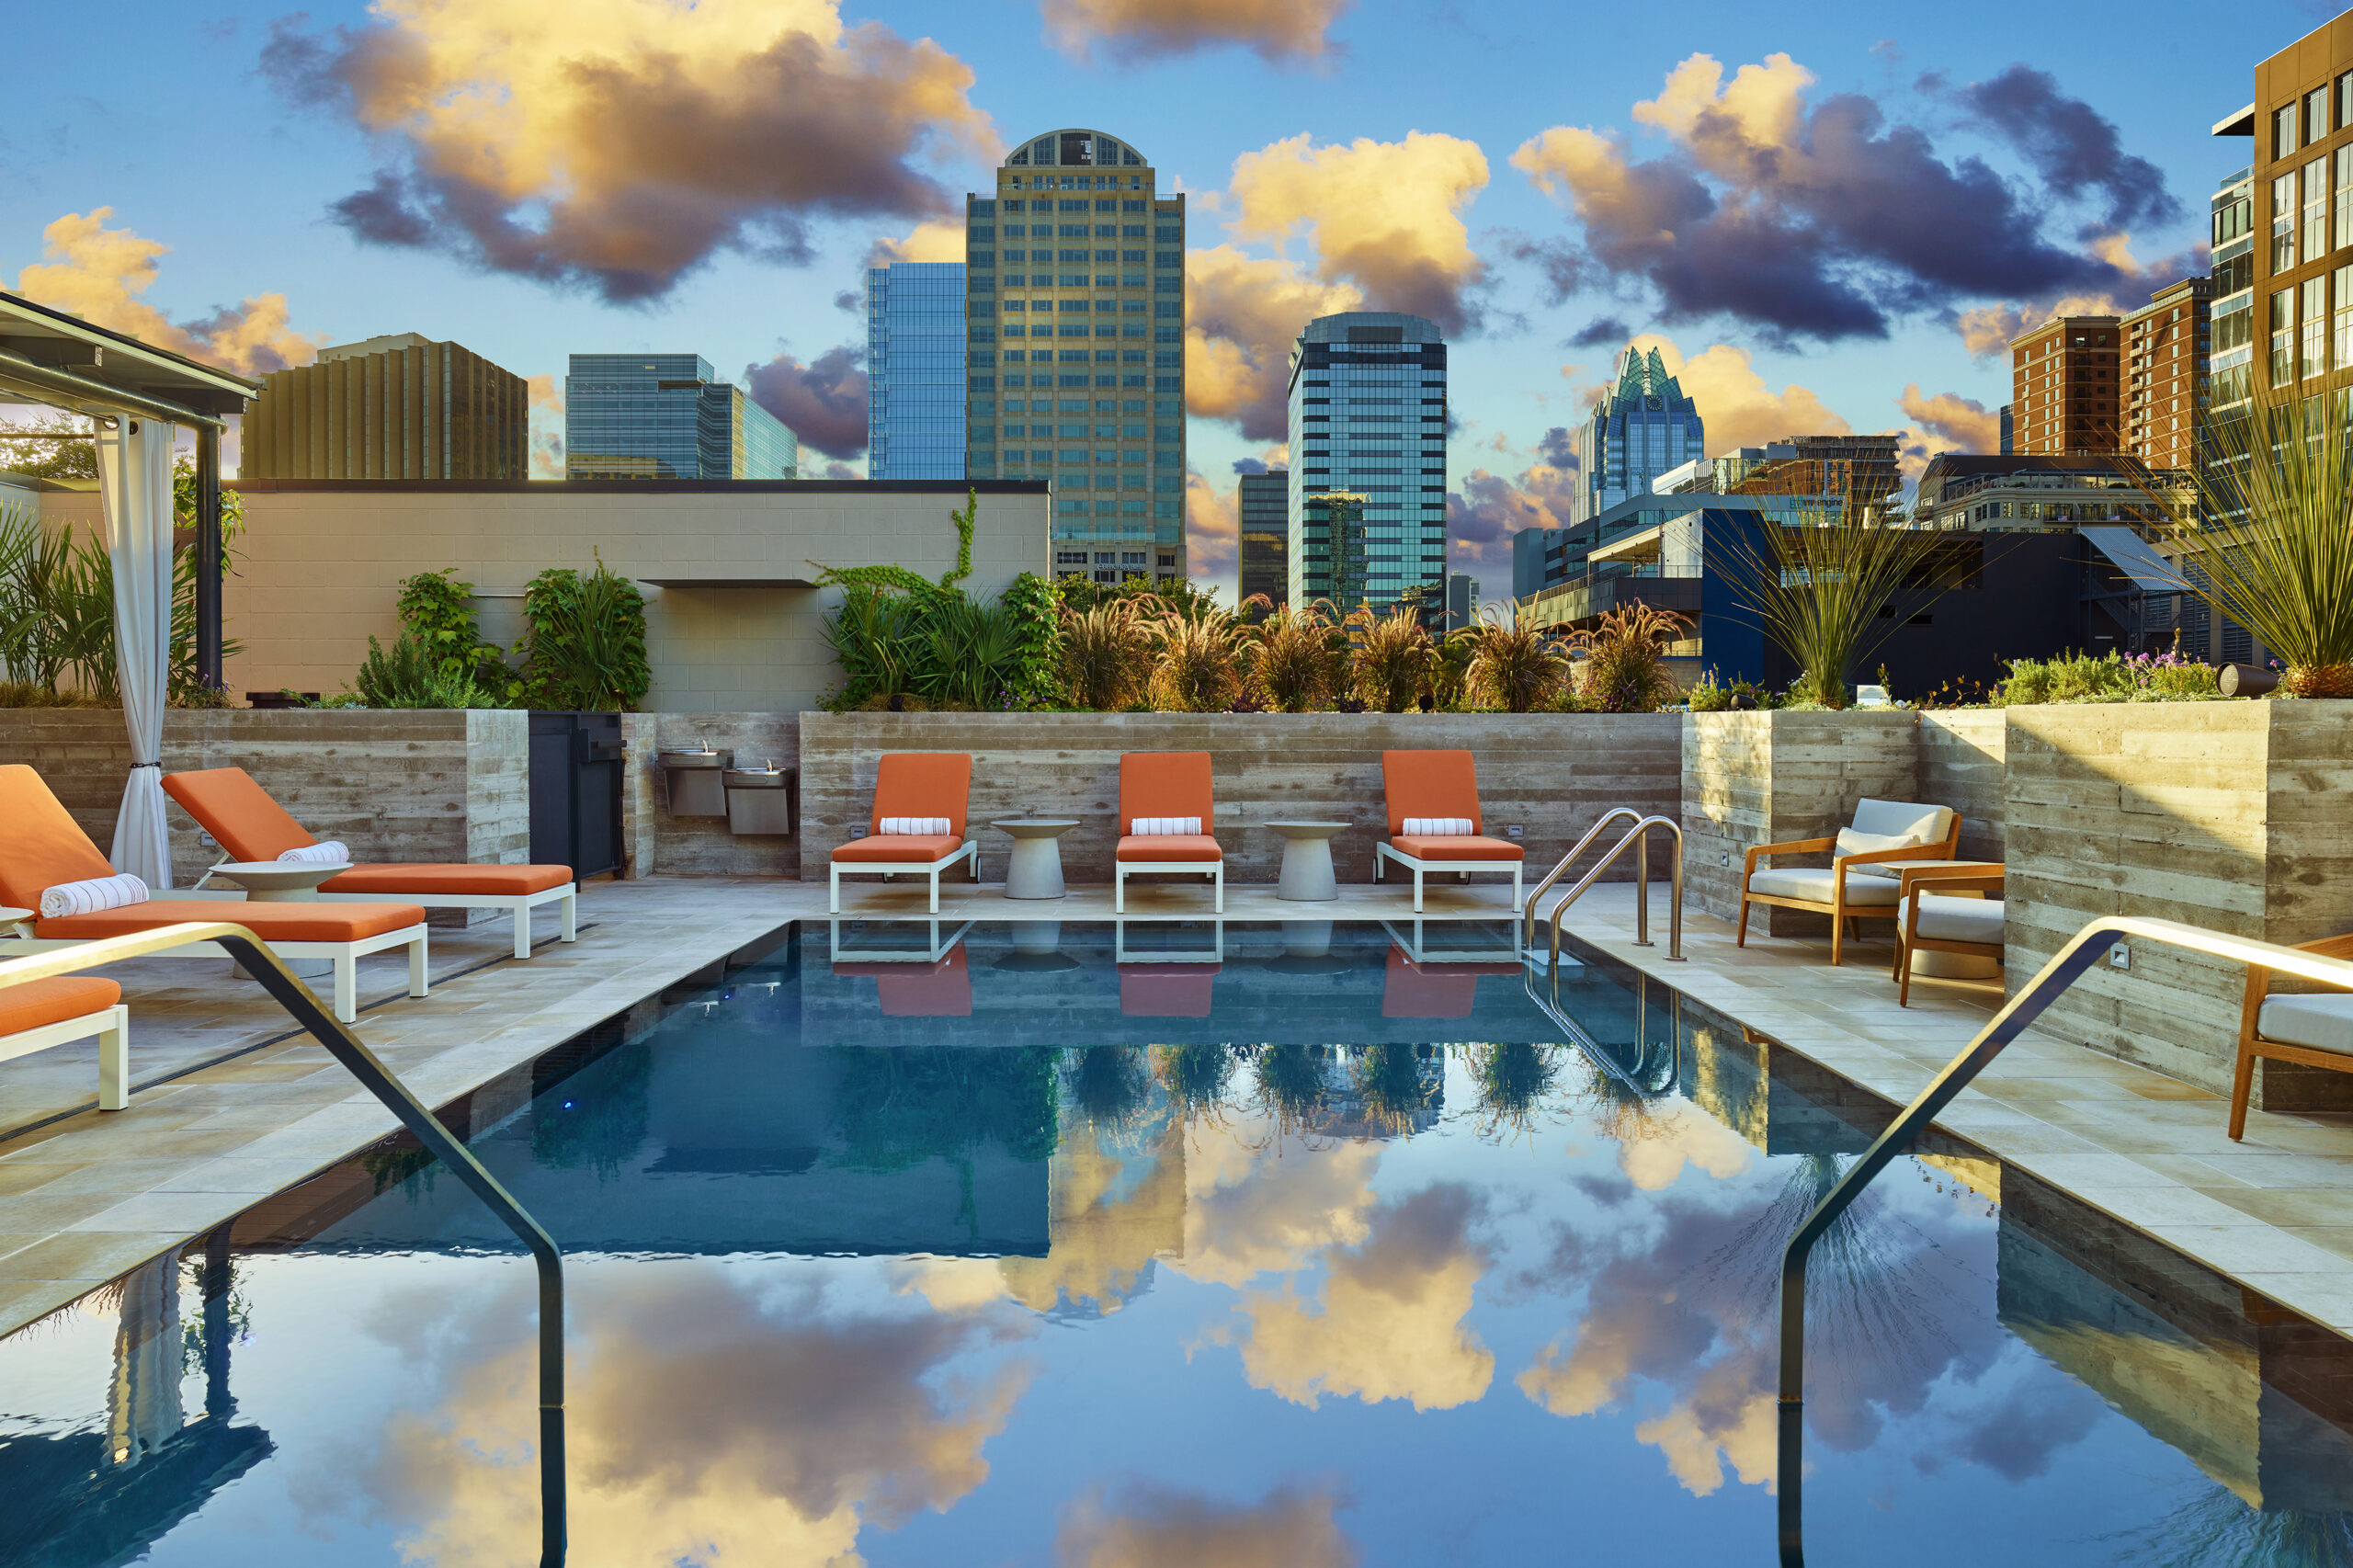 Image of pool and orange lounge chairs at Canopy Austin with Austin skyline in the background